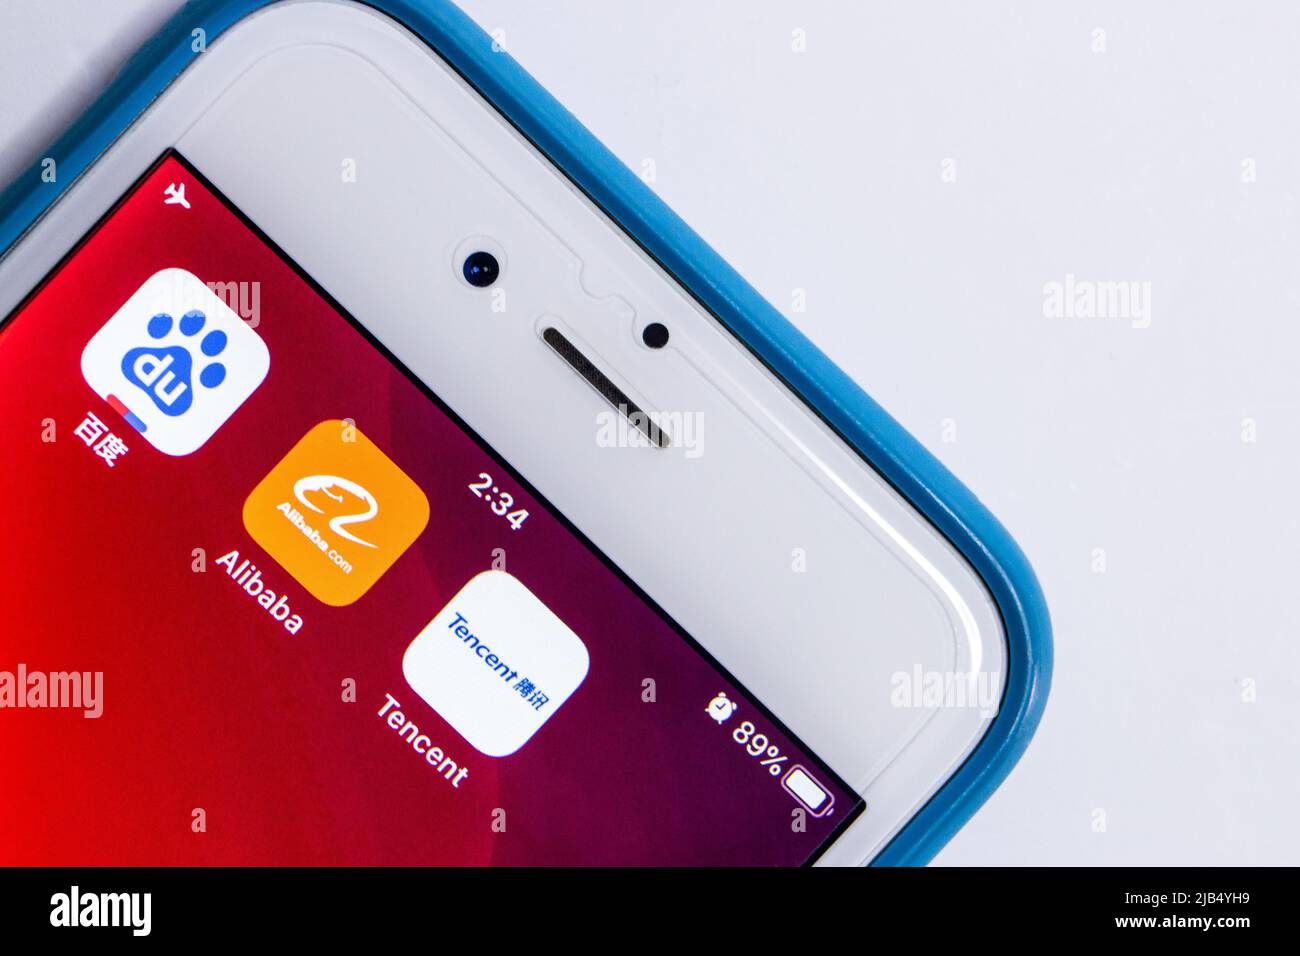 Icons of BAT, China’s biggest tech giants, on an iPhone. Baidu, Alibaba & Tencent are 3 Chinese top tech companies that dominated IT industry in China Stock Photo